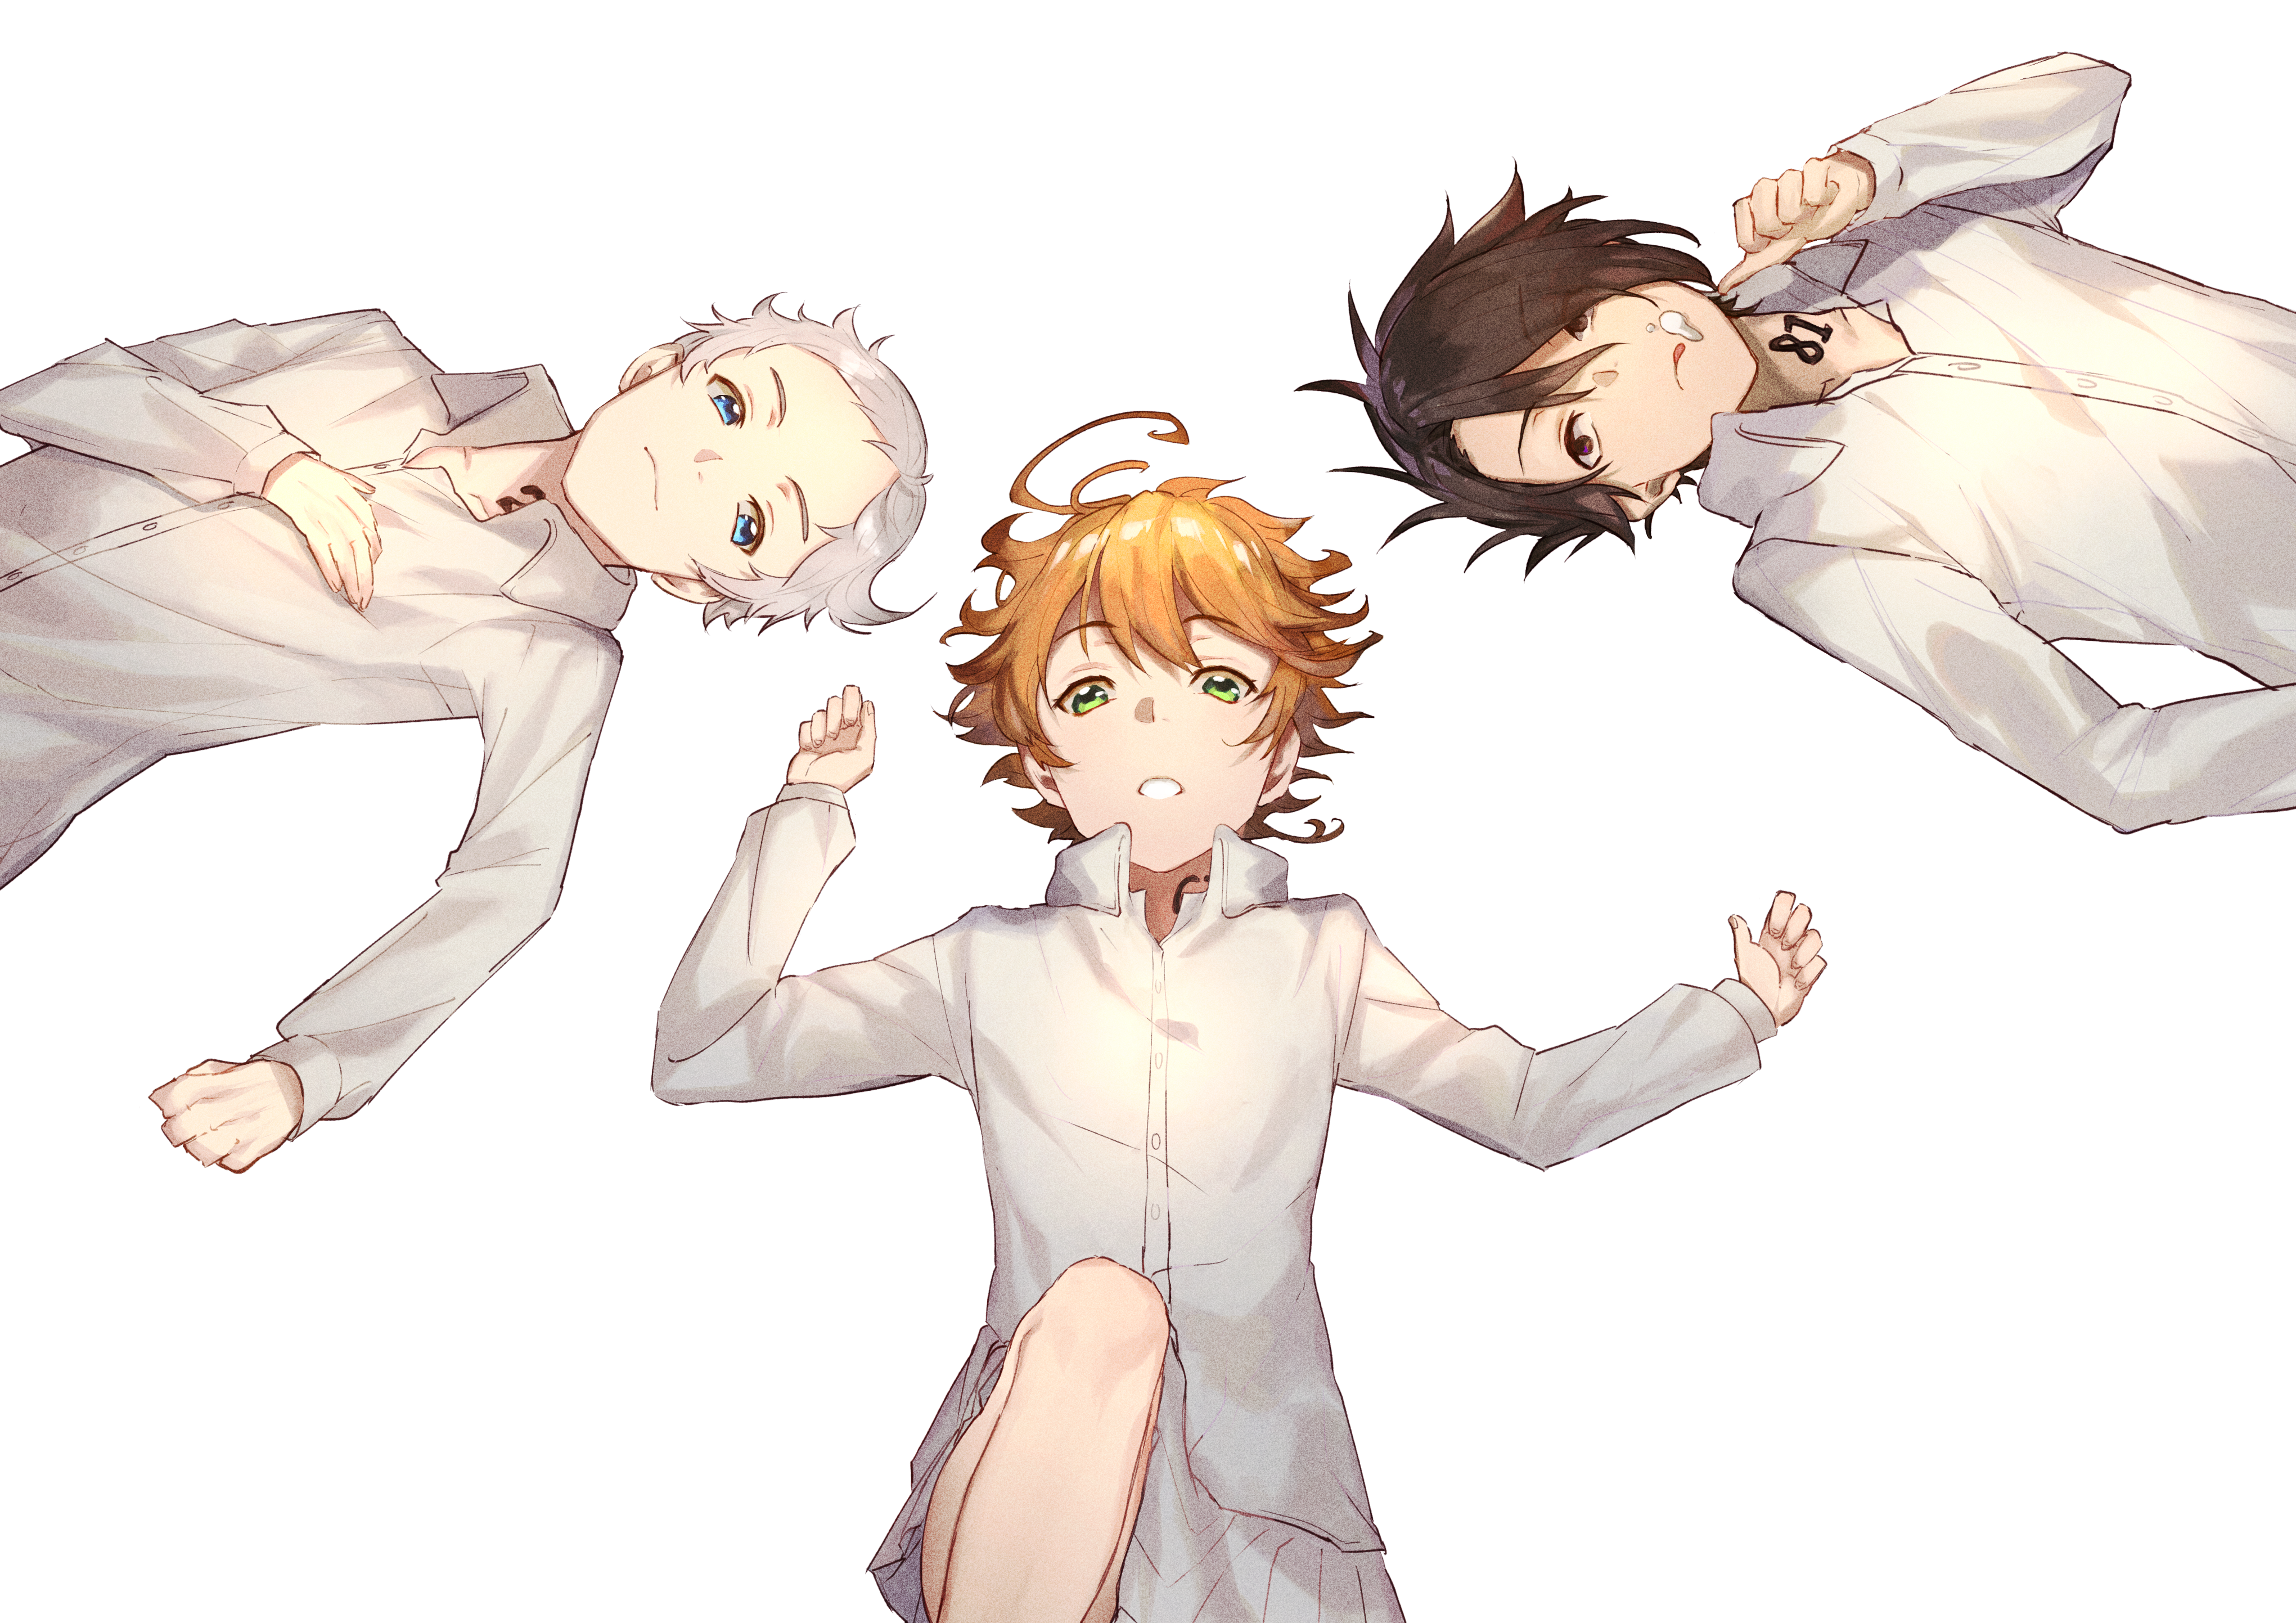 The Promised Neverland 4k Ultra HD Wallpaper by 心⑩